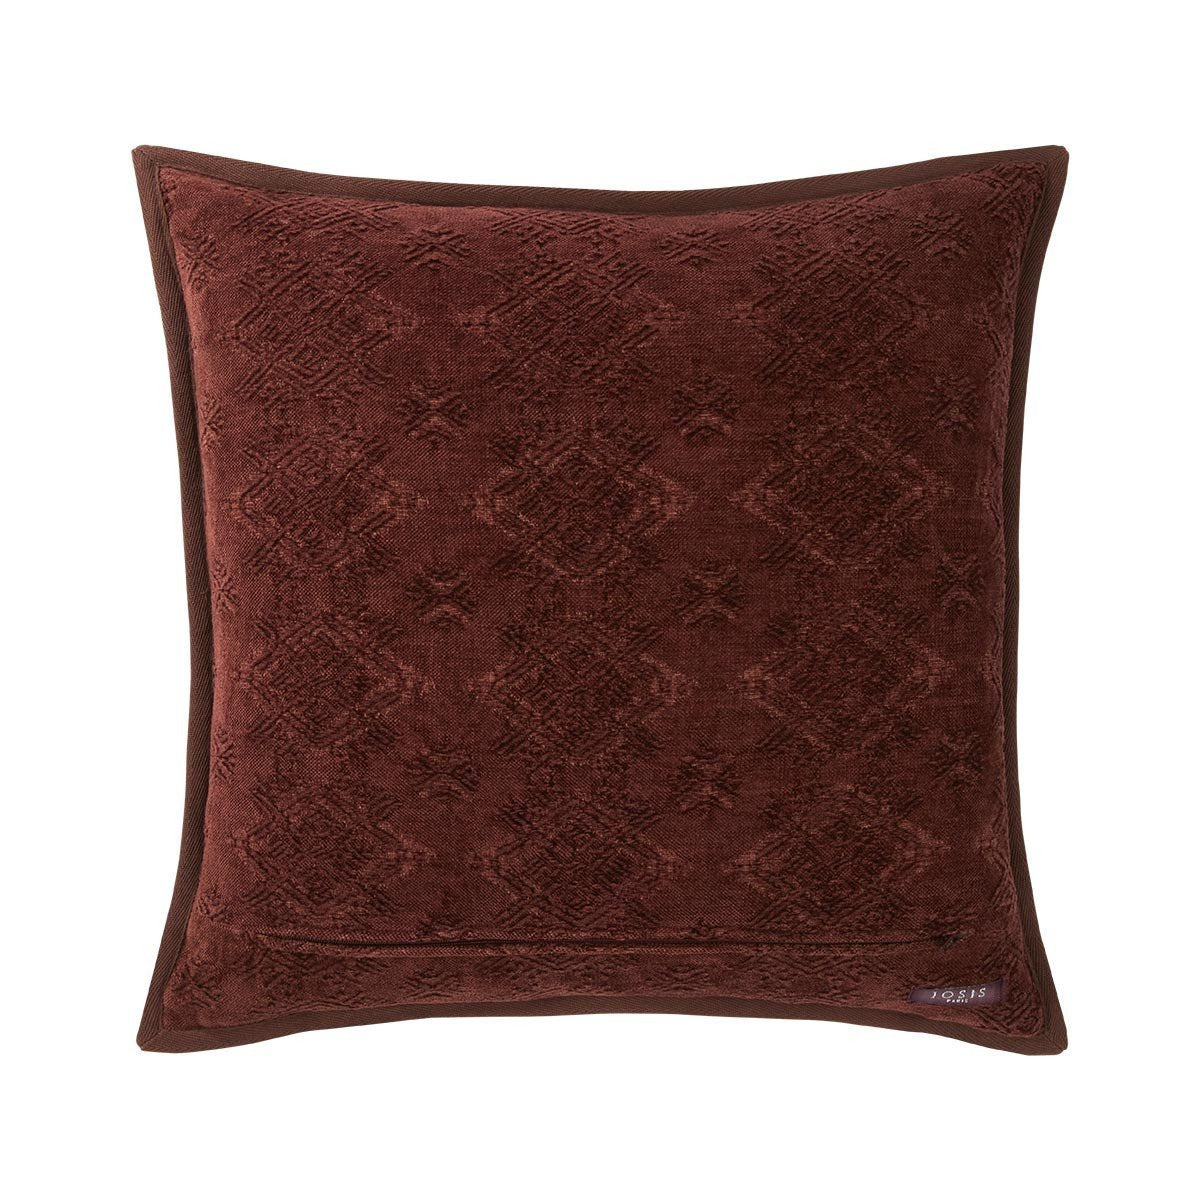 Fig Linens - Syracuse Acajou Decorative Pillow by Iosis - Back